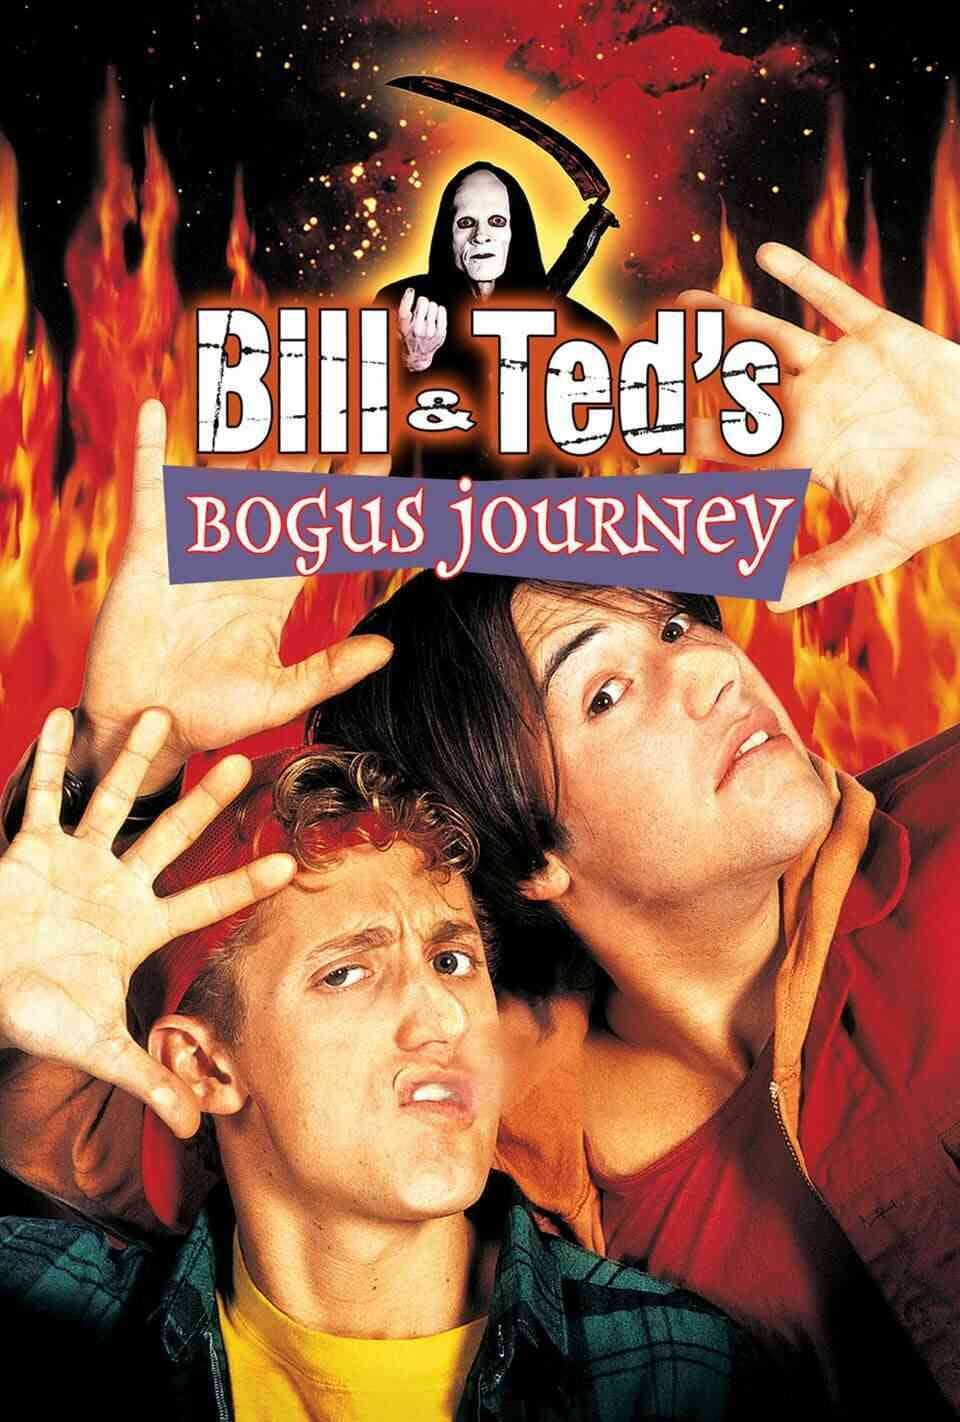 Read Bill & Ted's Bogus Journey screenplay (poster)